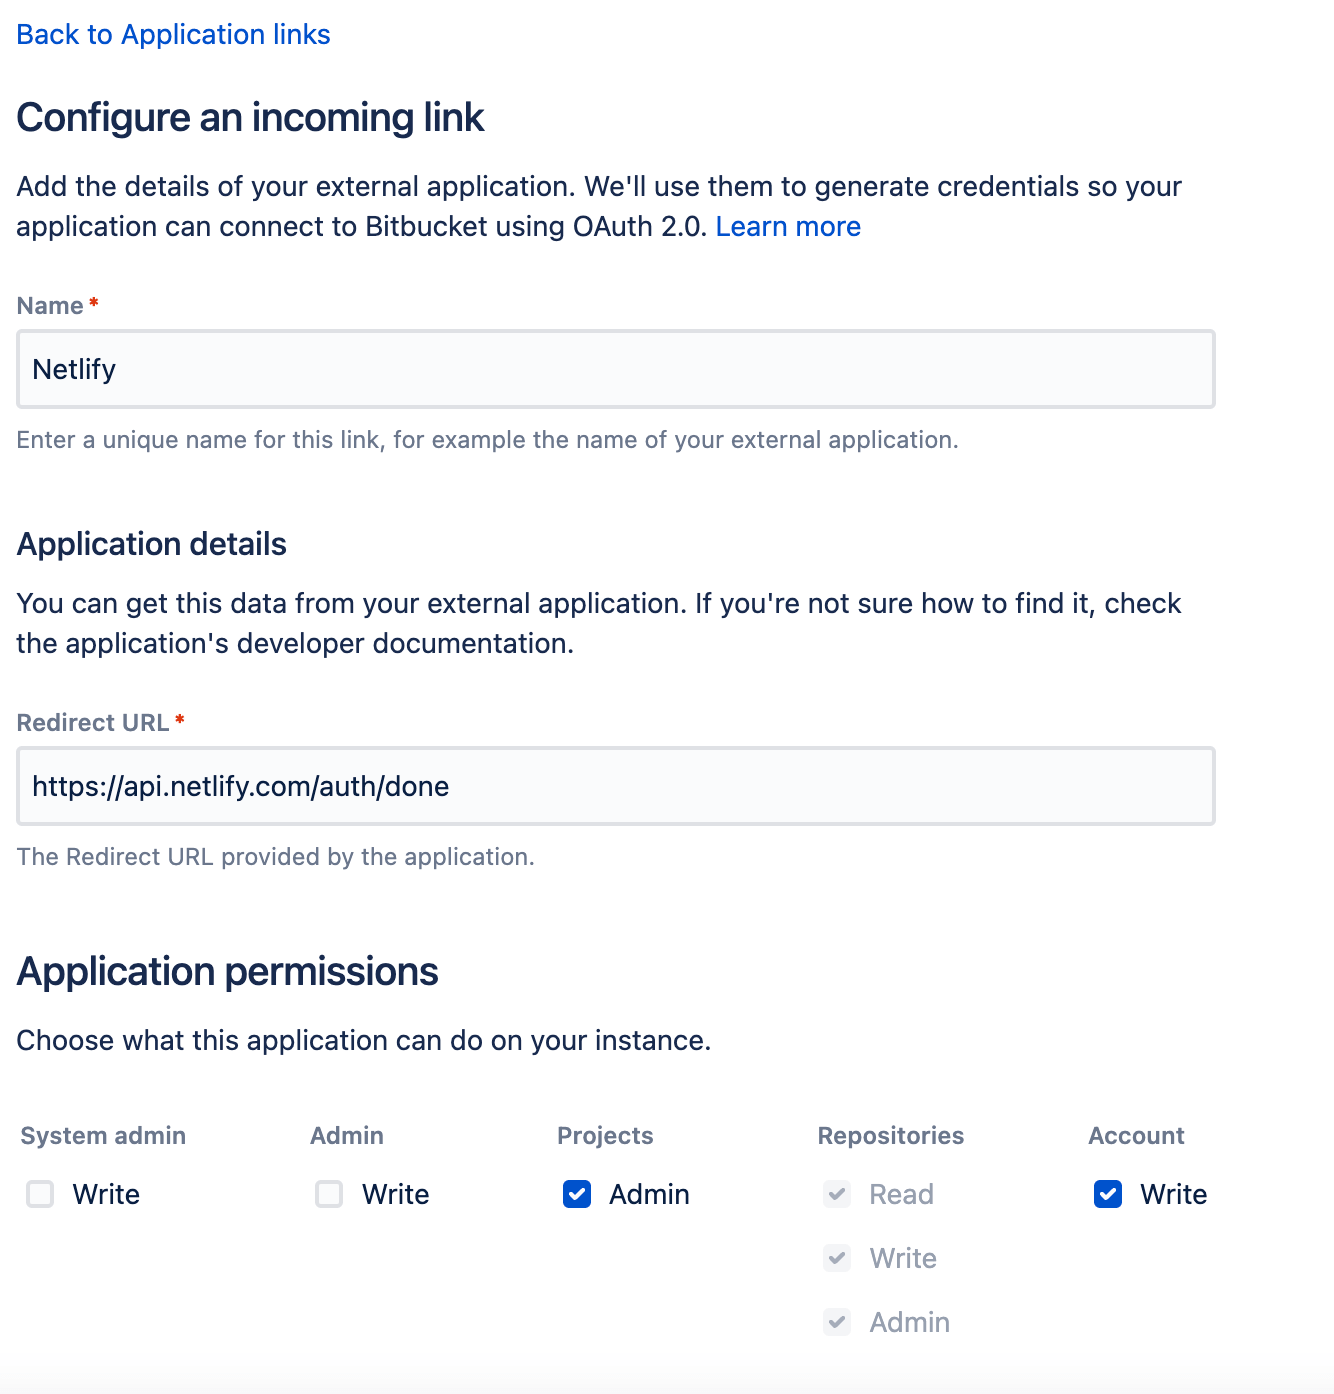 Configuration modal for a Bitbucket application link with recommended entries and selections.